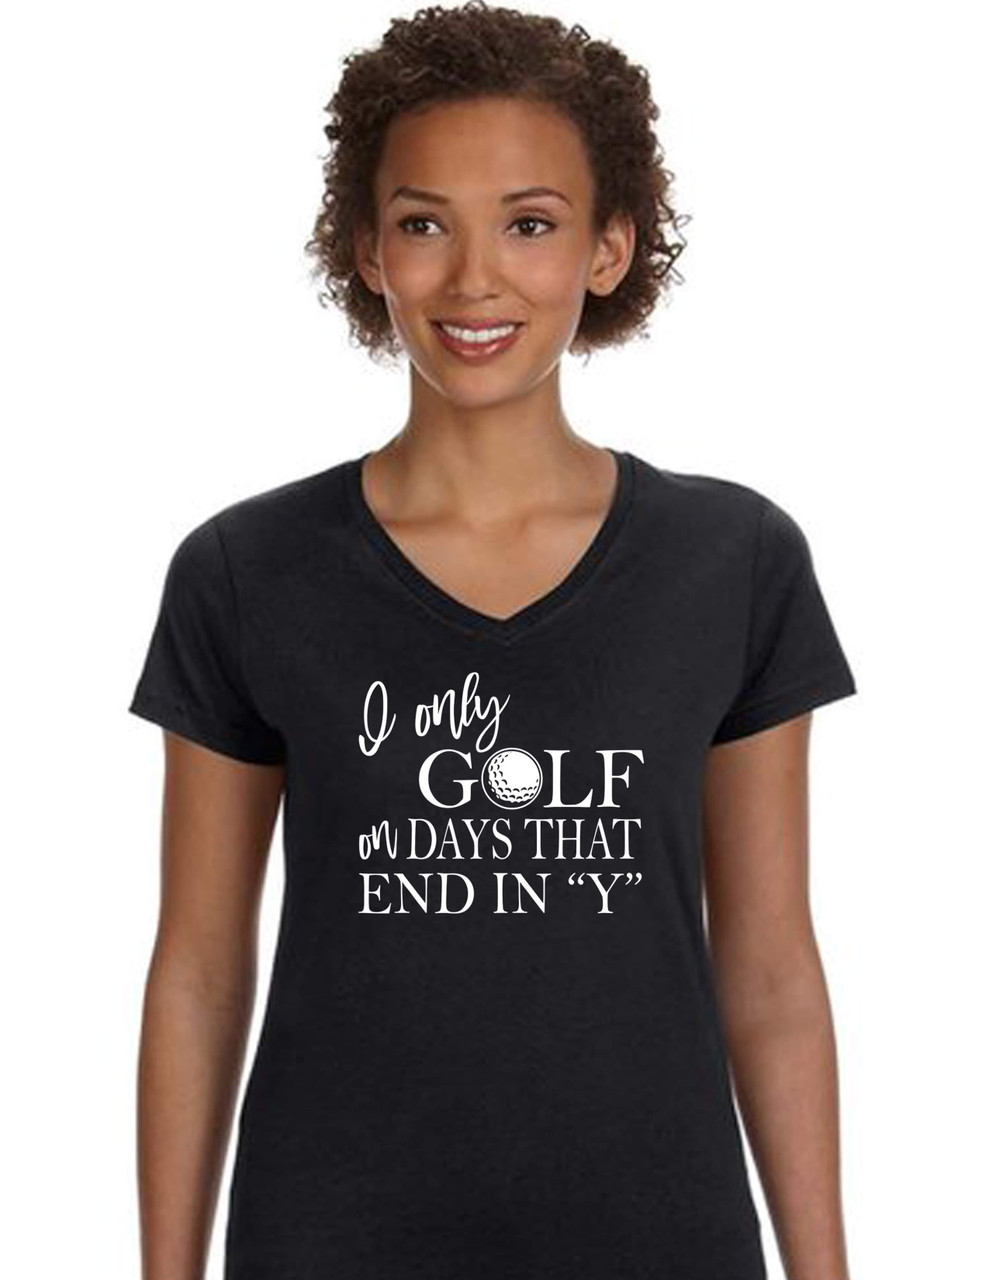 Fore Ladies Golf Graphic Tee - Days That End In 